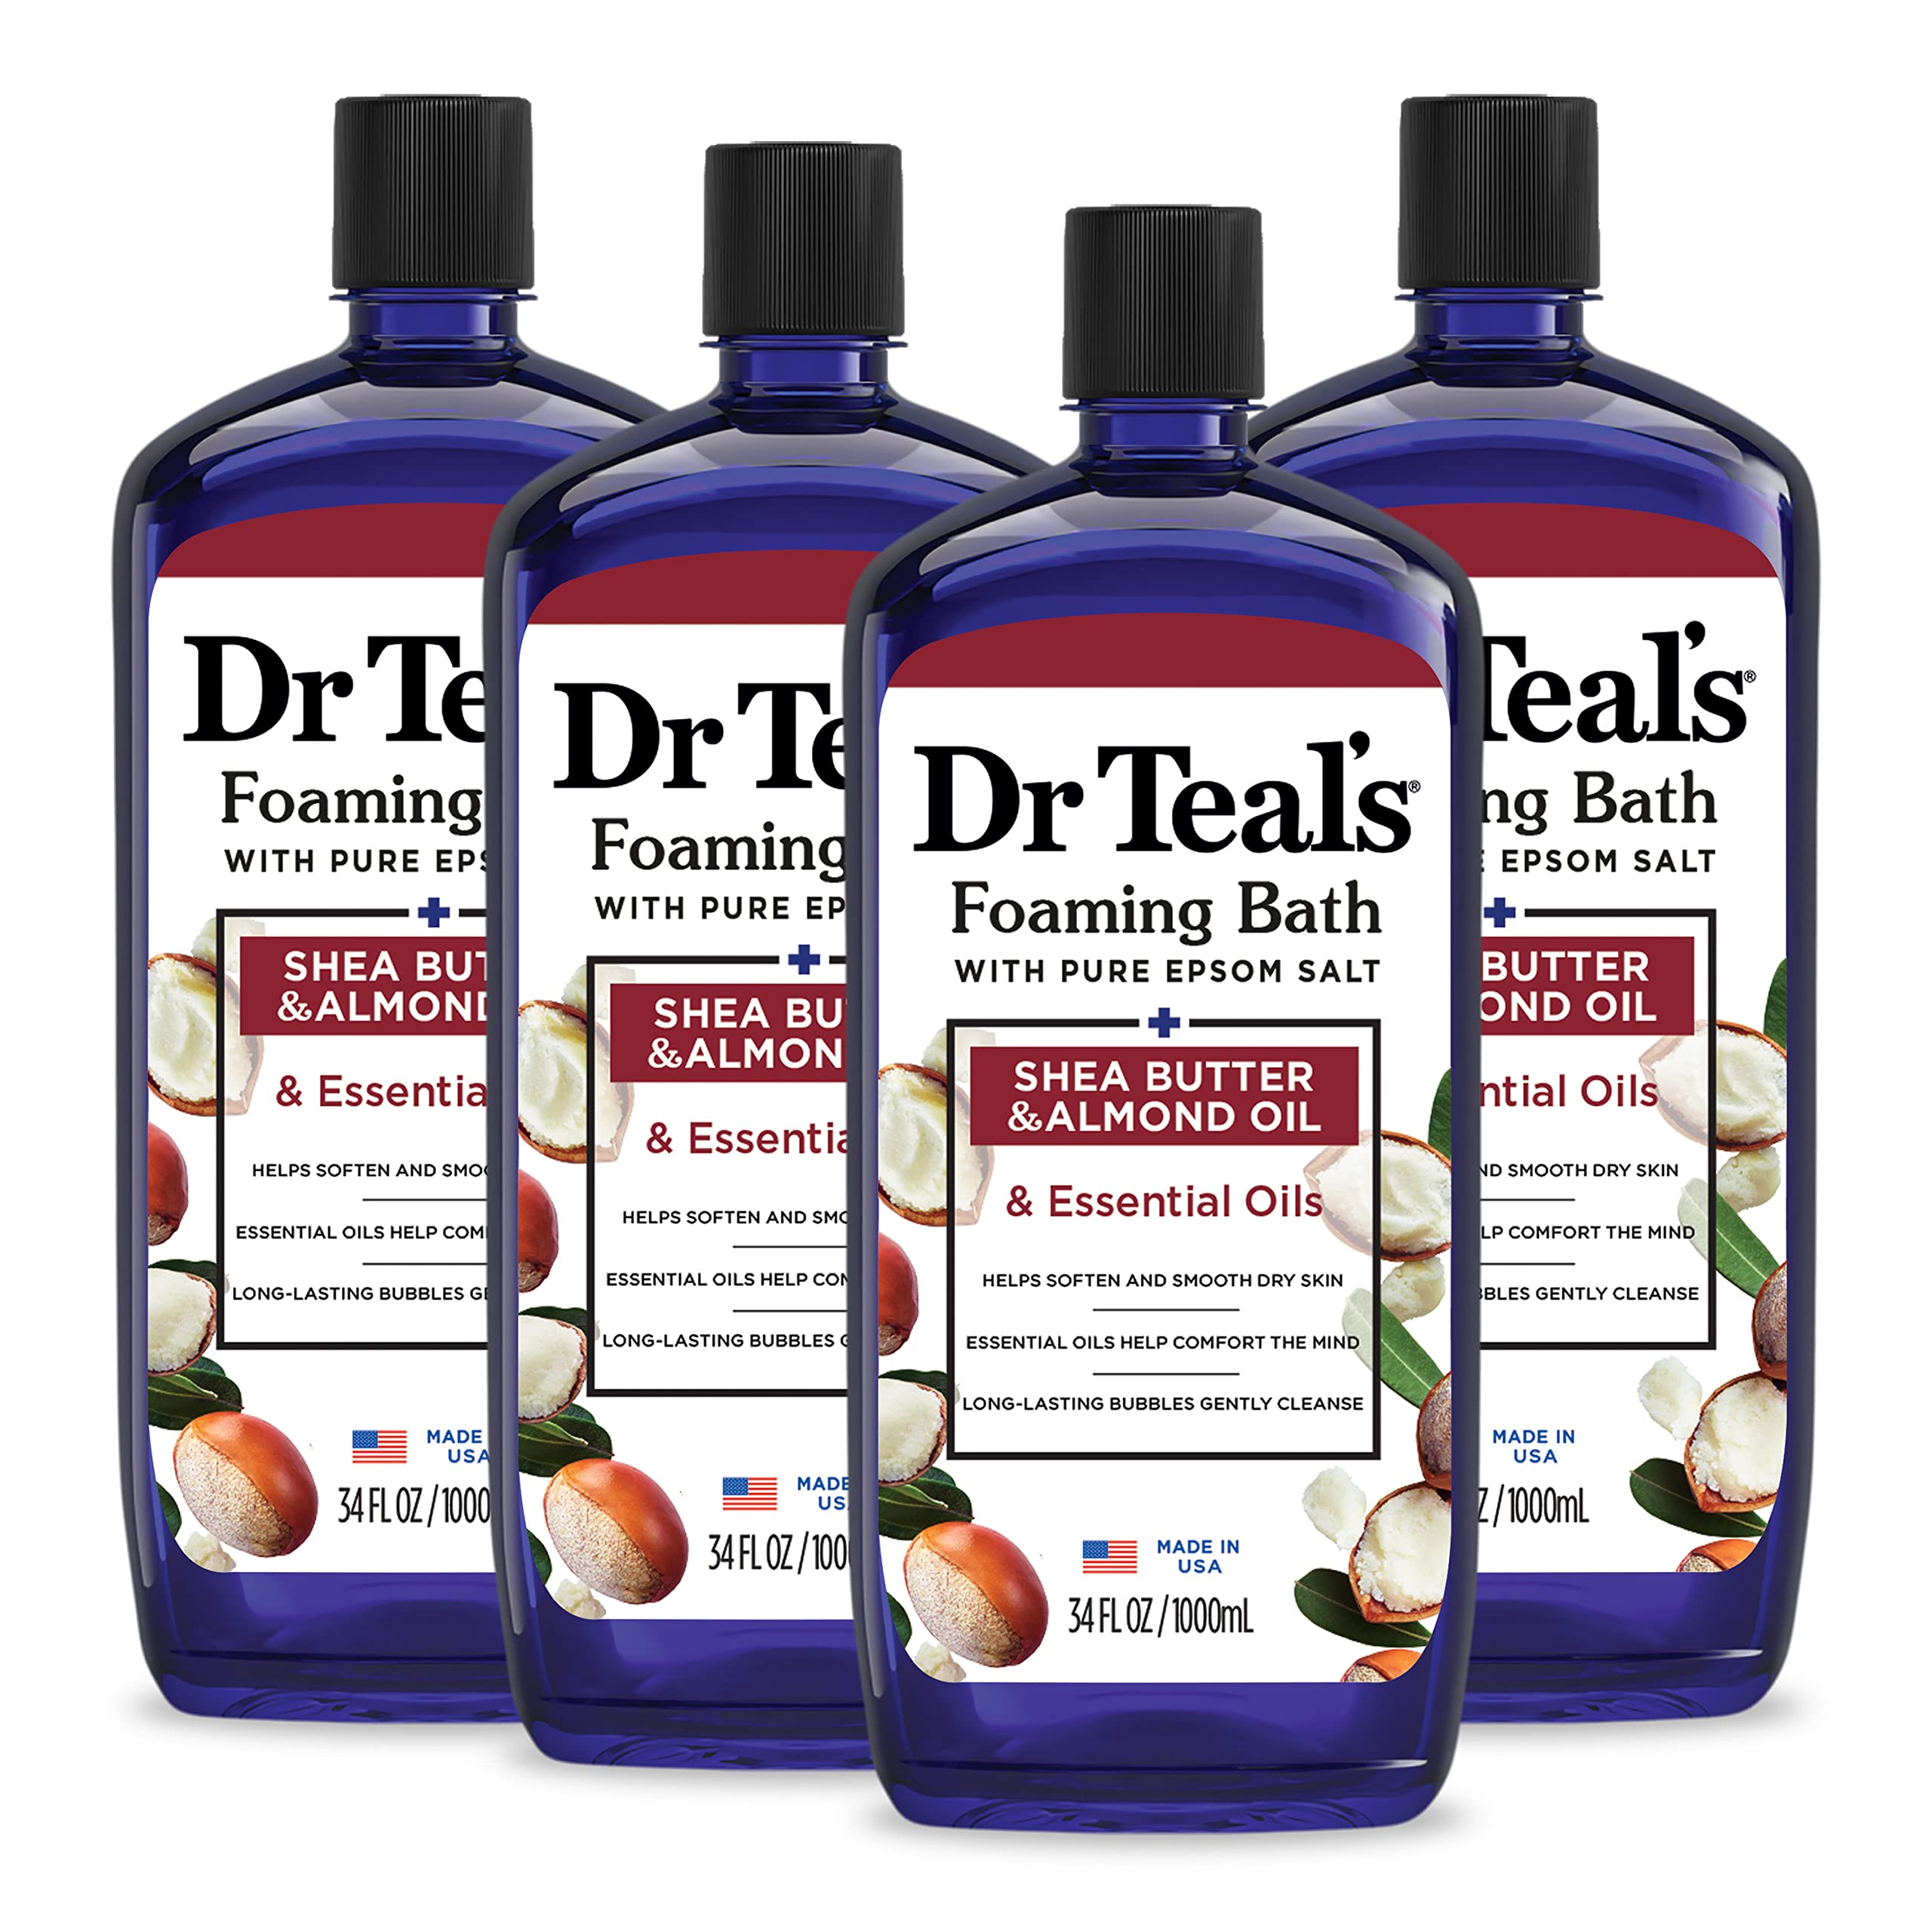 Dr Teal's Foaming Bath with Pure Epsom Salt, Shea Butter & Almond, 34 fl oz (Pack of 4) (Packaging May Vary)